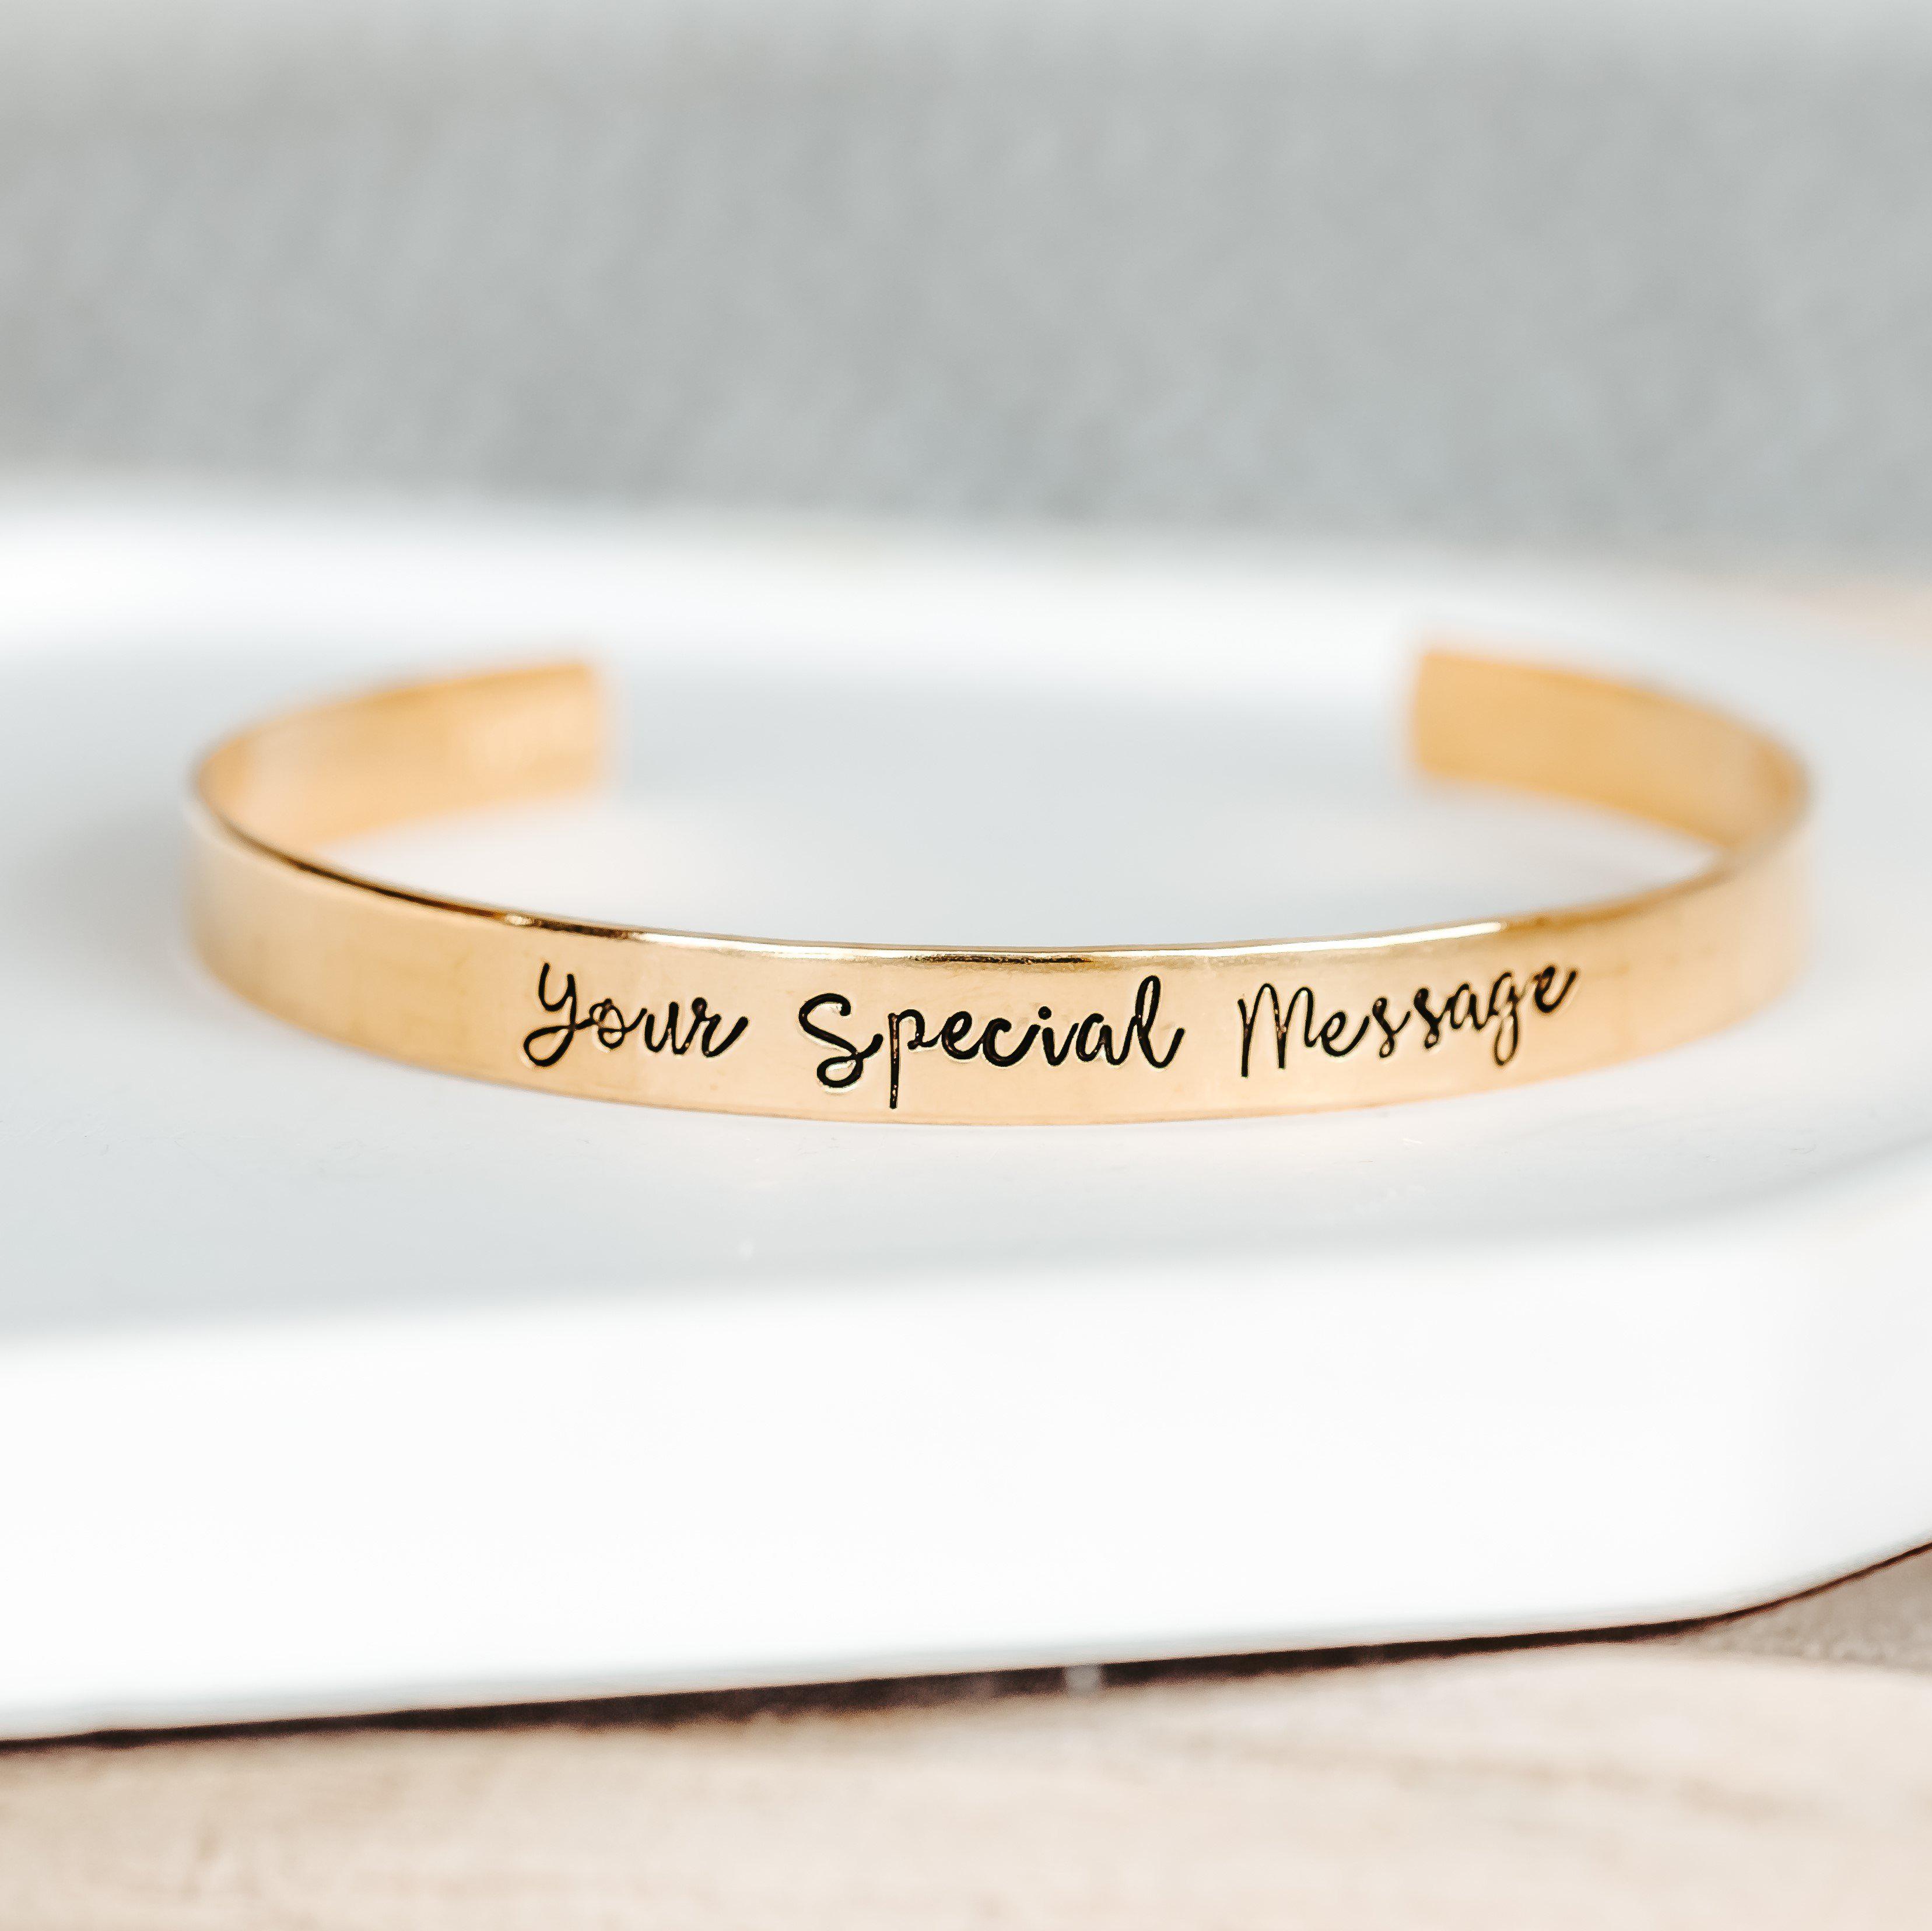 NEVERTHELESS, SHE PERSISTED Stacking Cuff Bracelet Salt and Sparkle